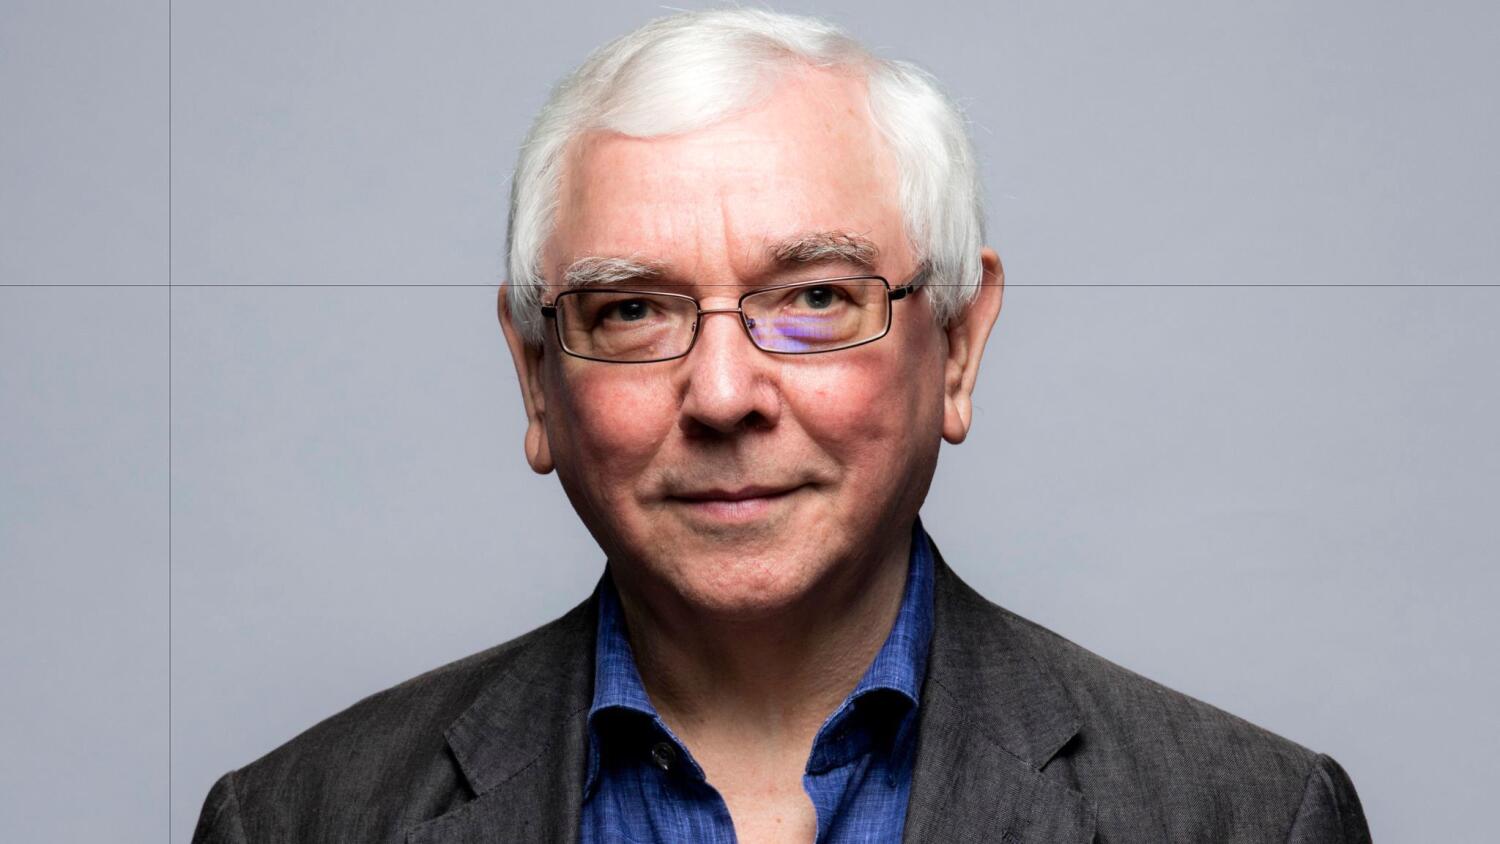 Terence Davies, acclaimed director of 'Distant Voices, Still Lives,' dies at 77